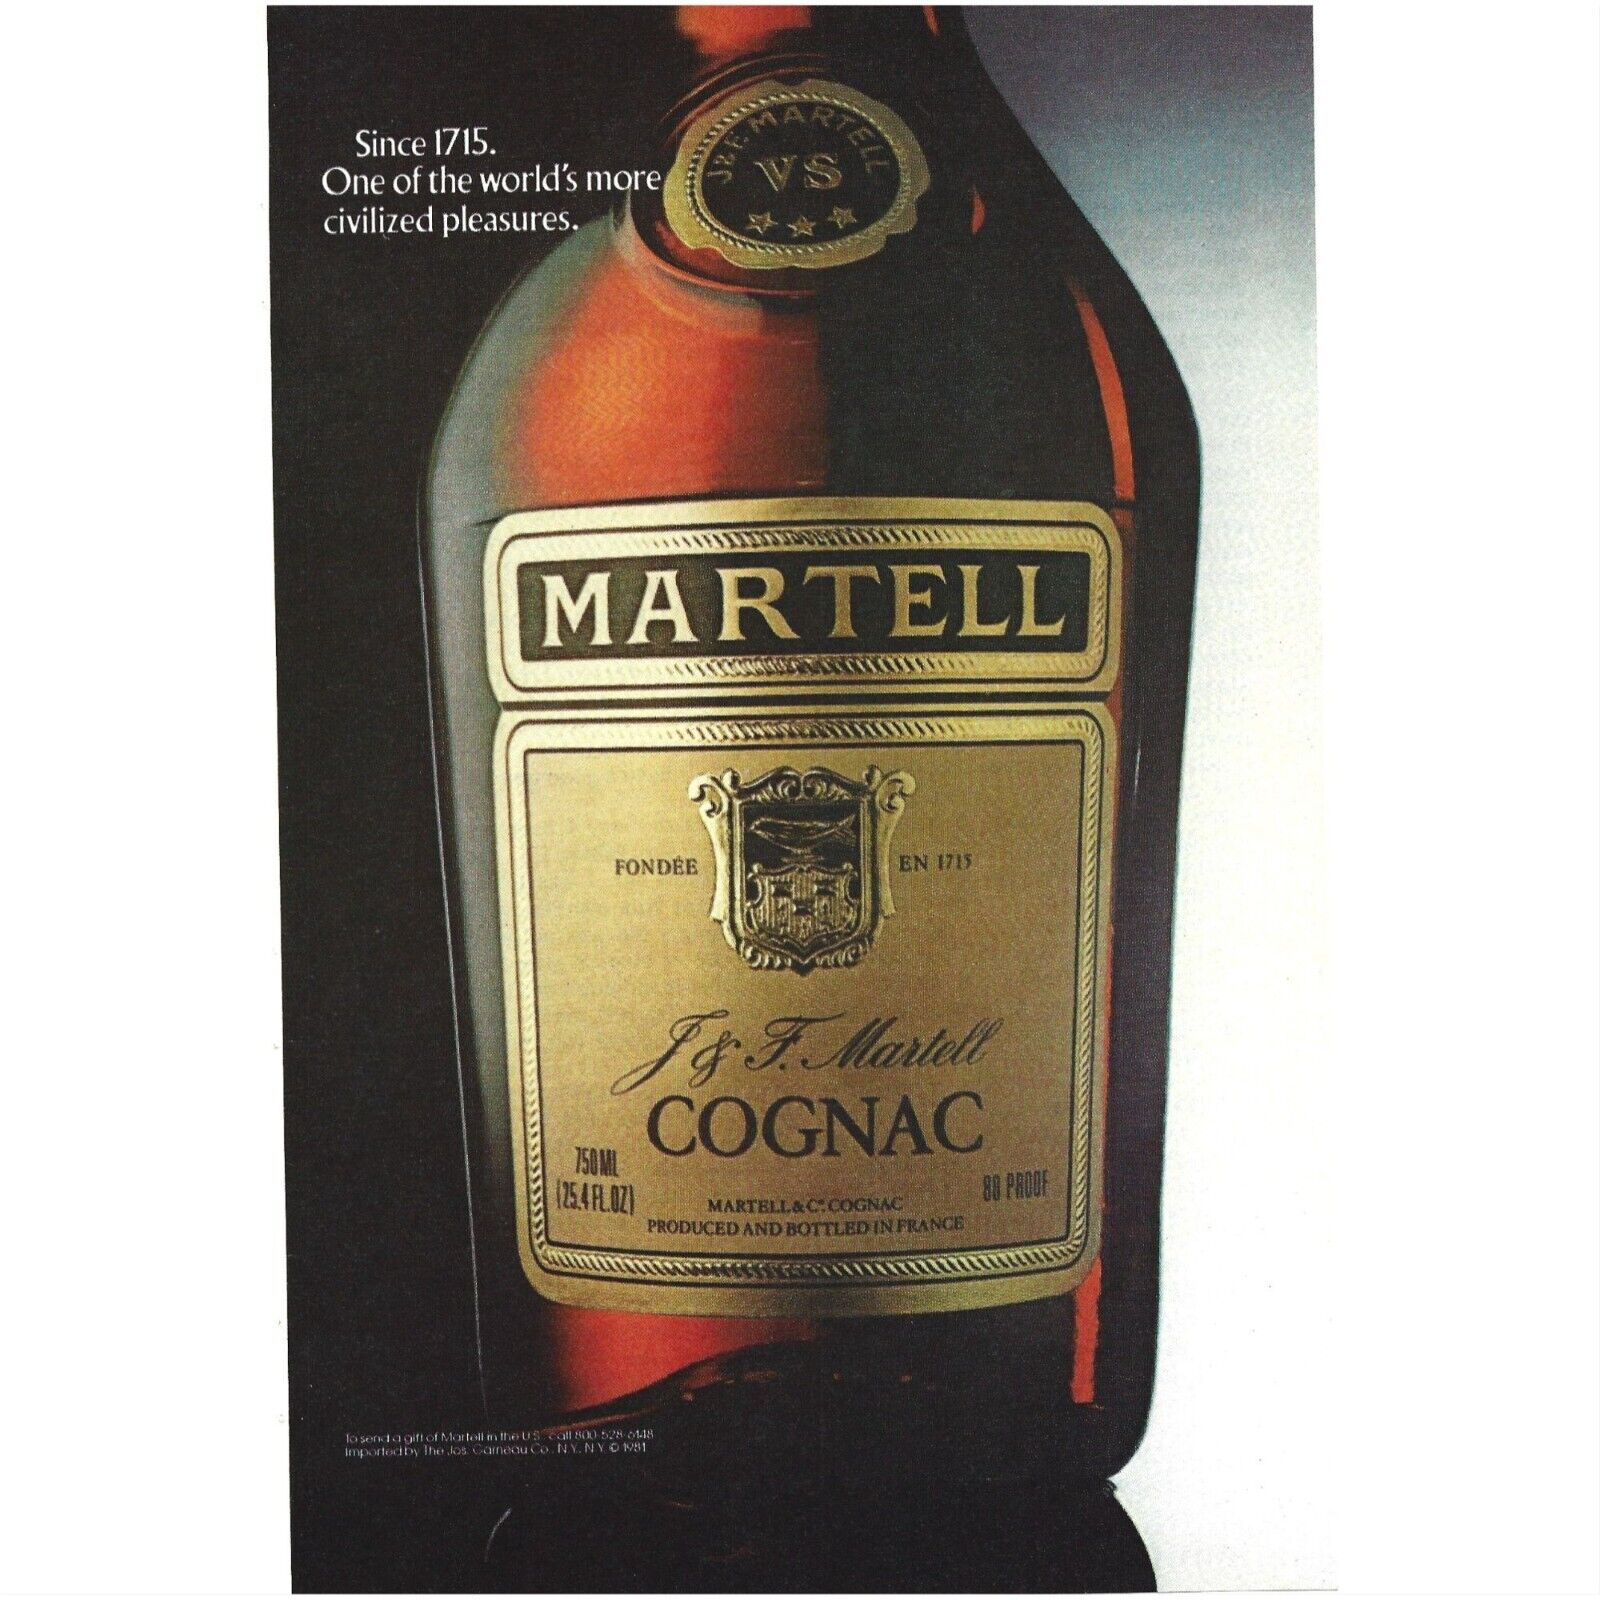 Martell Cognac Founded in 1715 France AD 1980s Vintage Print Ad